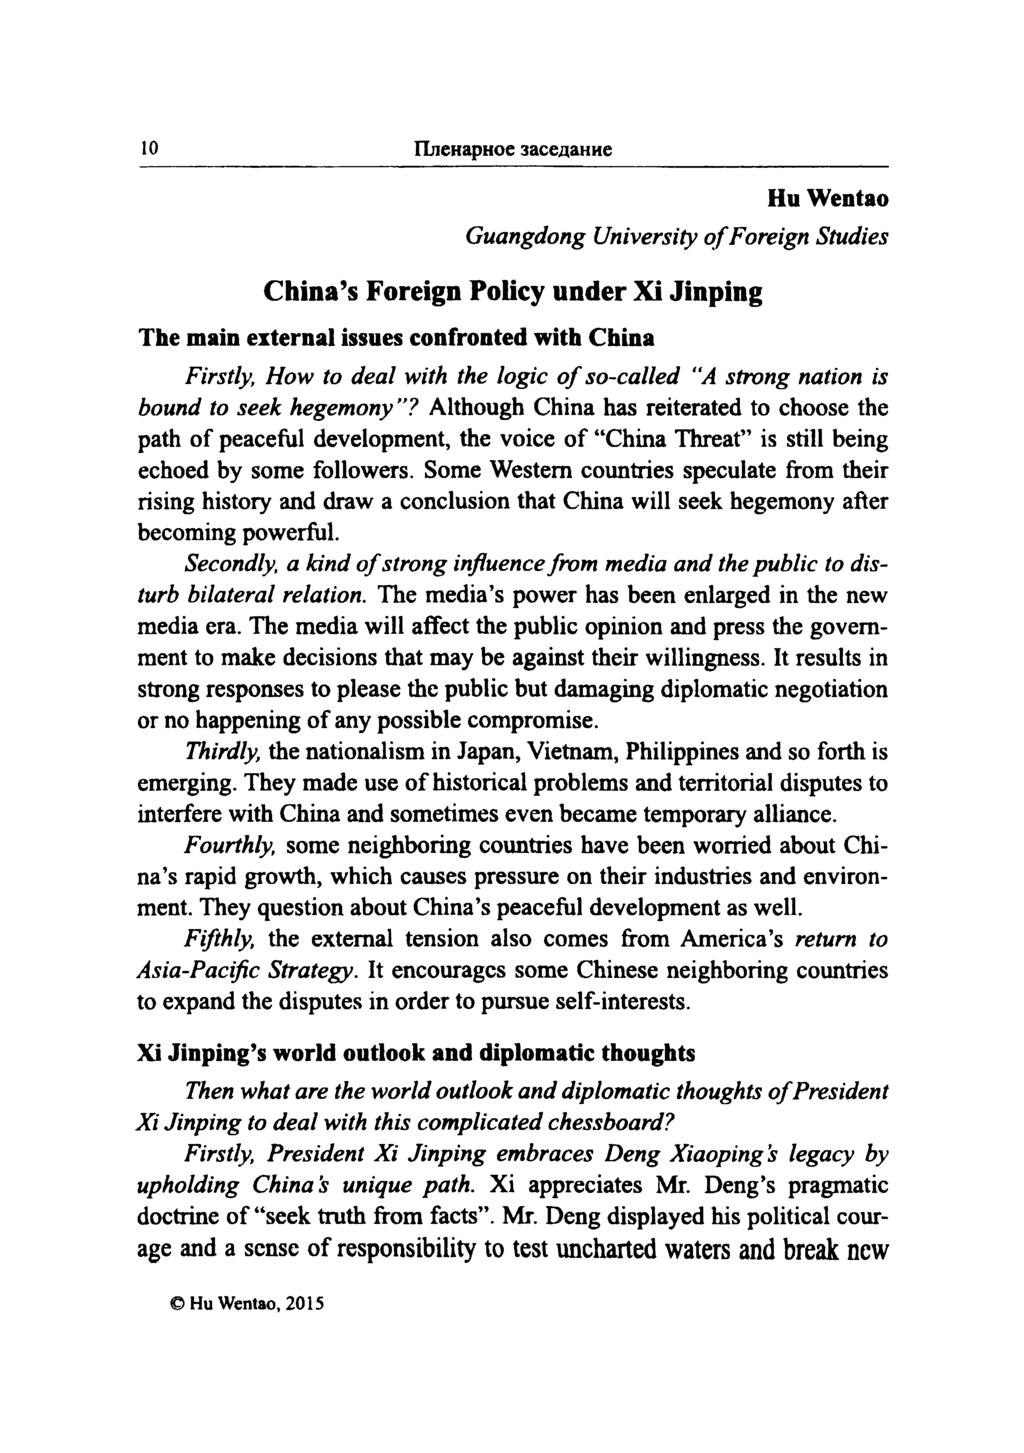 10 Пленарное заседание Hu Wentao Guangdong University o f Foreign Studies China s Foreign Policy under Xi Jinping The main external issues confronted with China Firstly, How to deal with the logic o